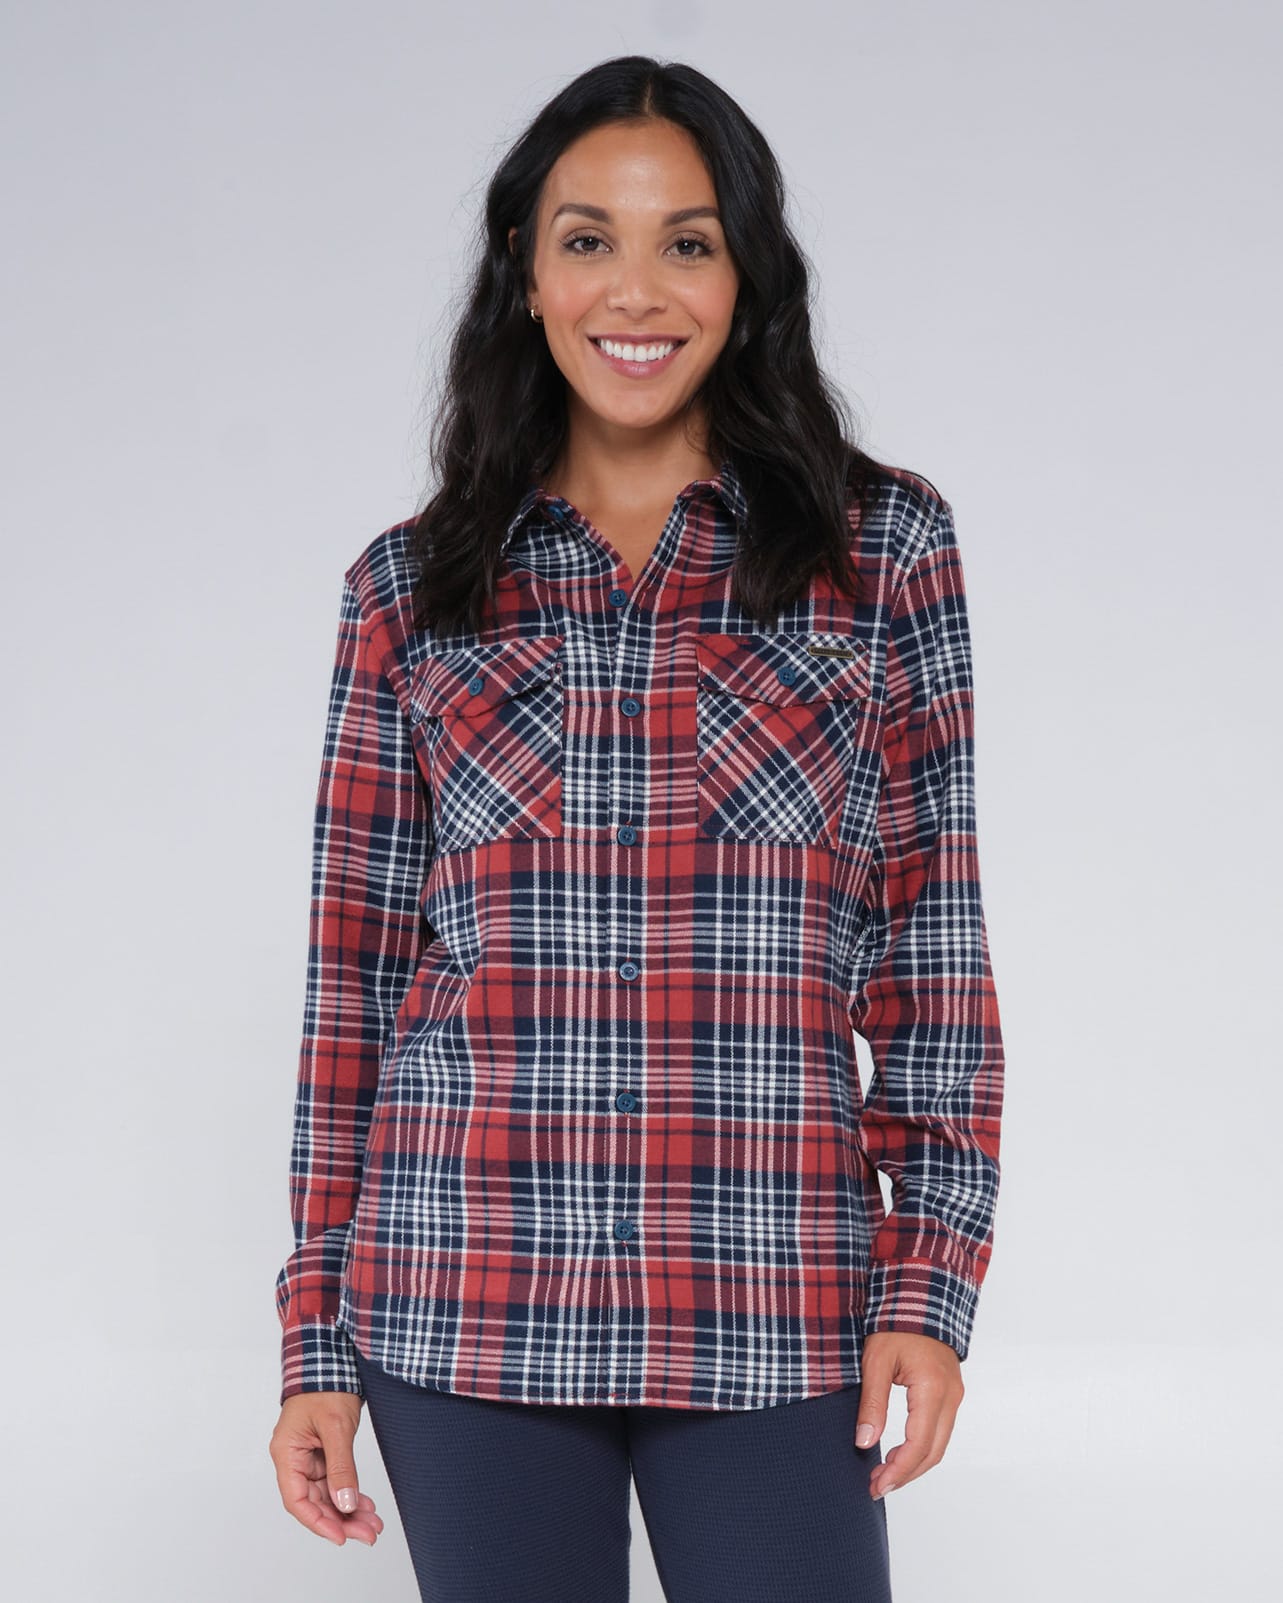 Salty crew WOVEN SHIRTS LONG HAUL FLANNEL - Spiced in Spiced